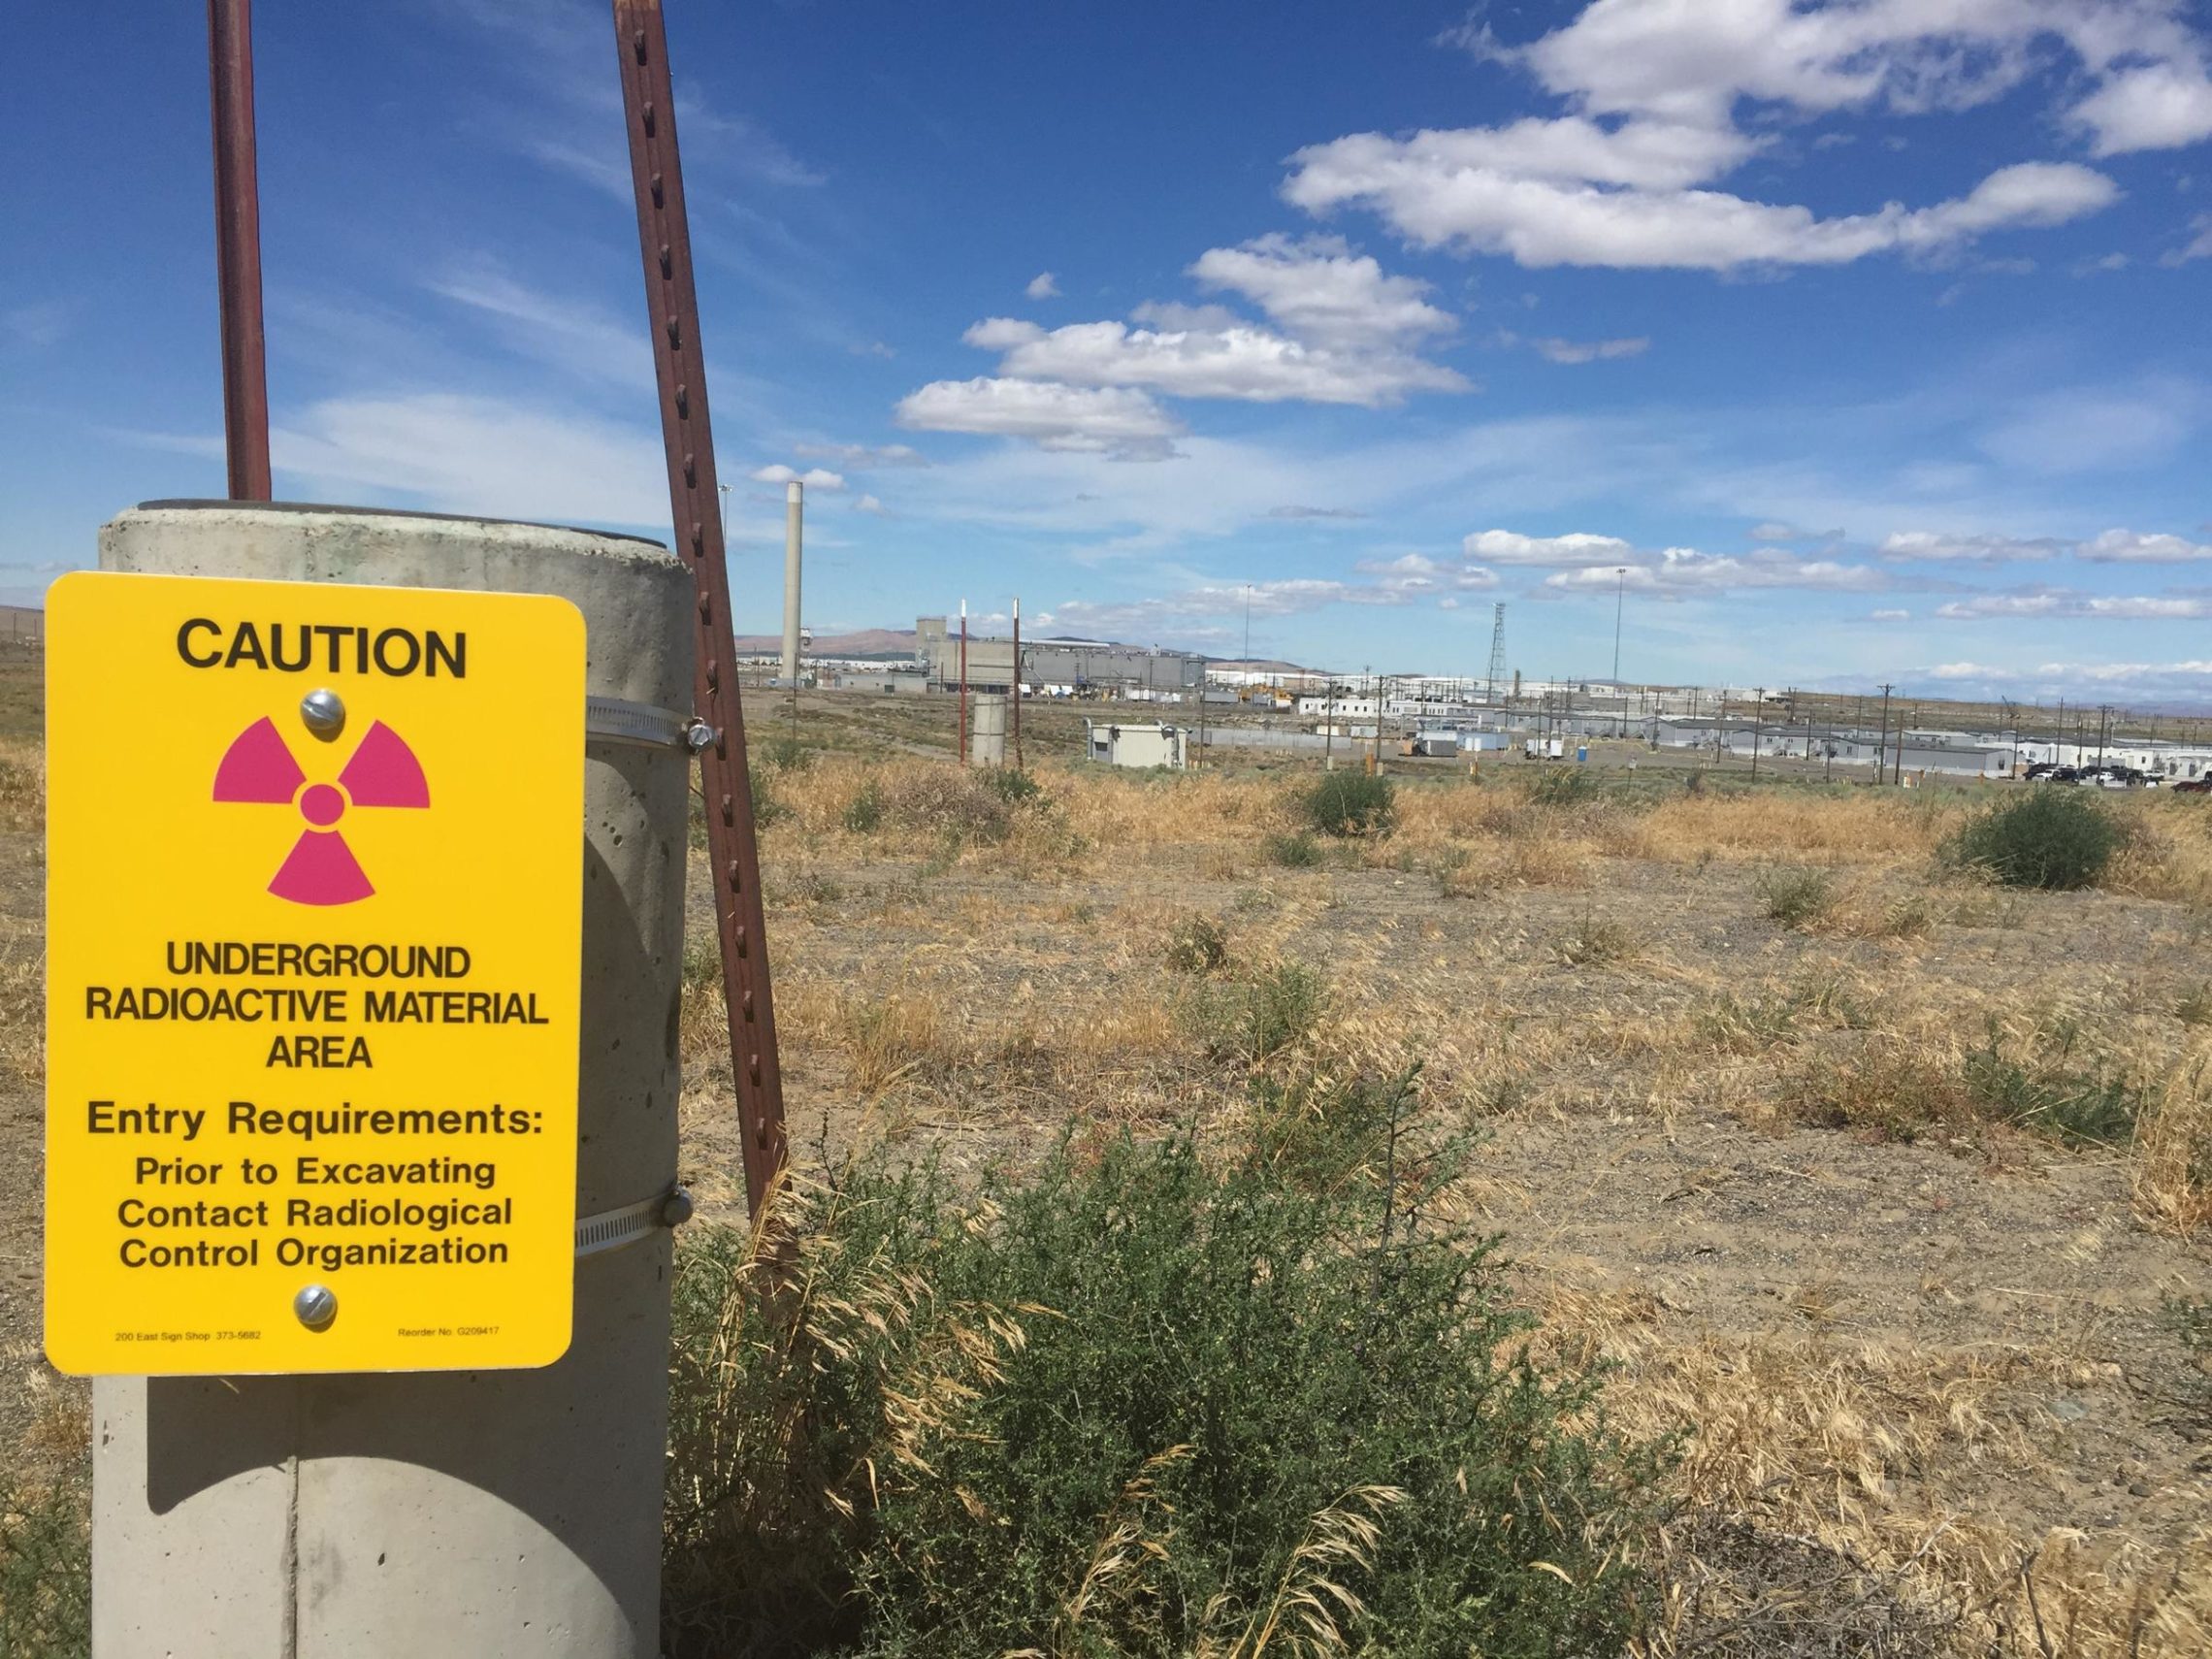 The Plutonium Finishing Plant at the Hanford Site in southeastern Washington. The site includes 56 million gallons of radioactive waster across 580 square miles.